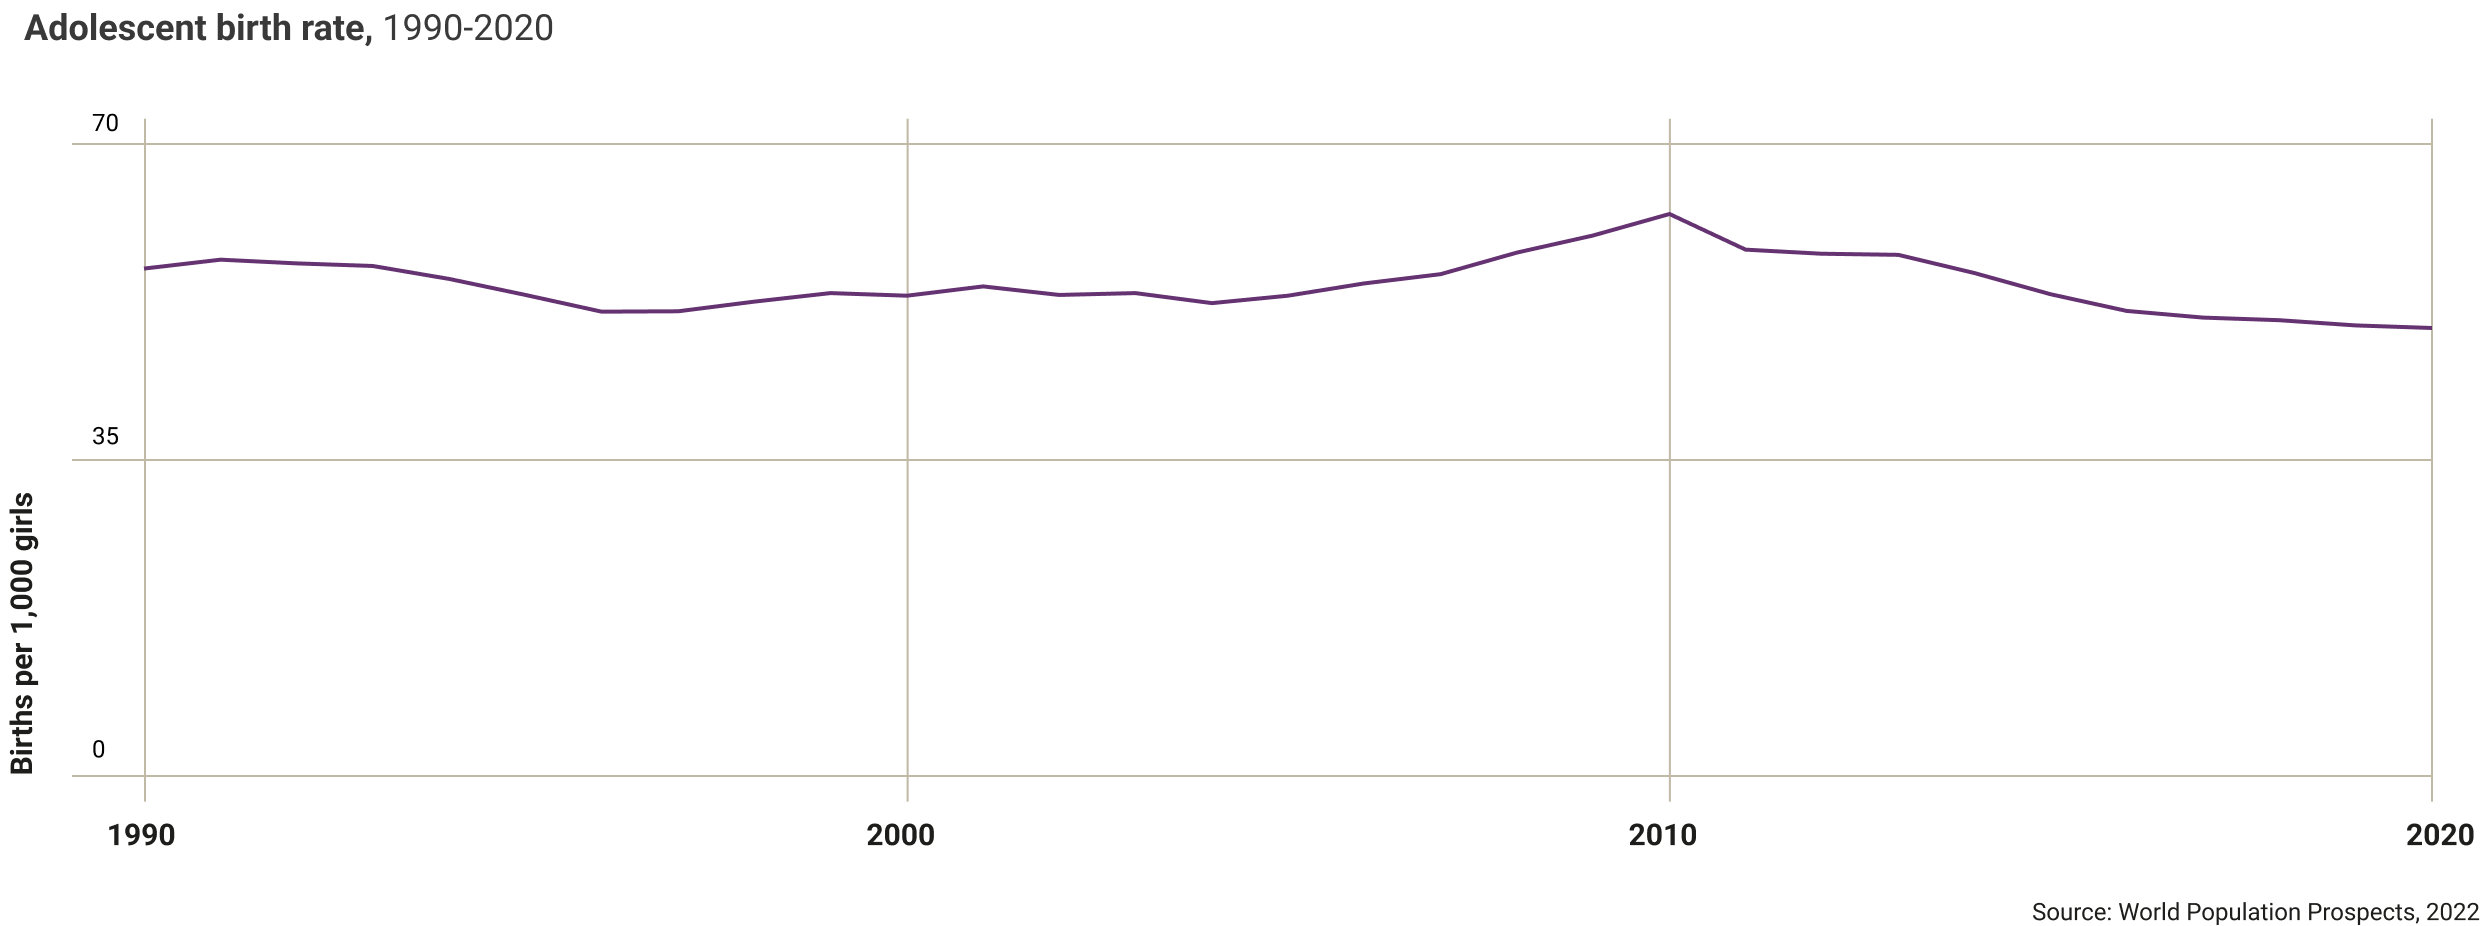 philippines-adolescence-birth-rate-1990-2020.png